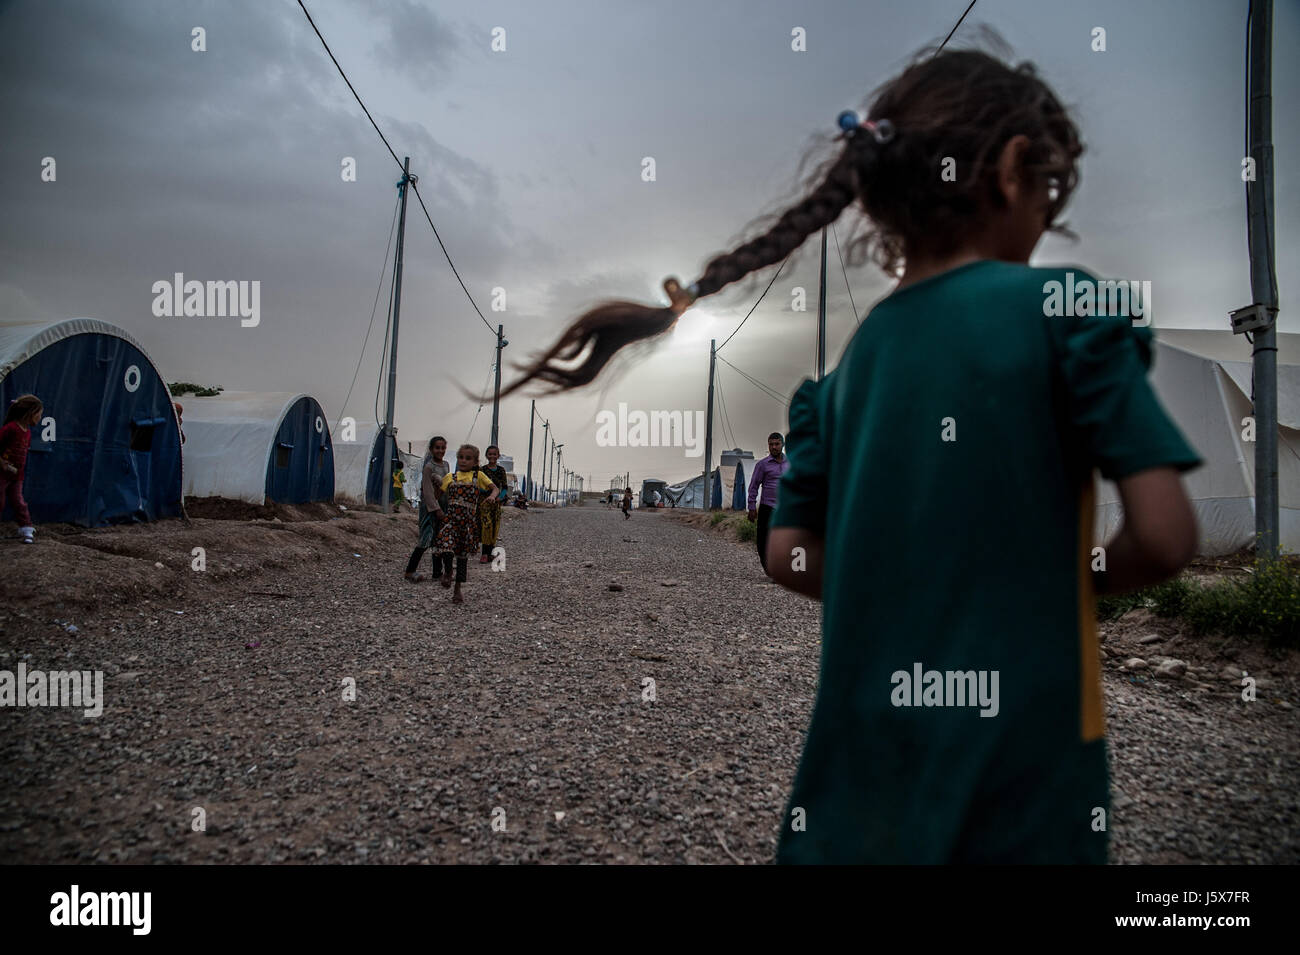 Children displaced by fighting in Mosul play in Khazir IDP camp in Kurdistan, Iraq. Stock Photo